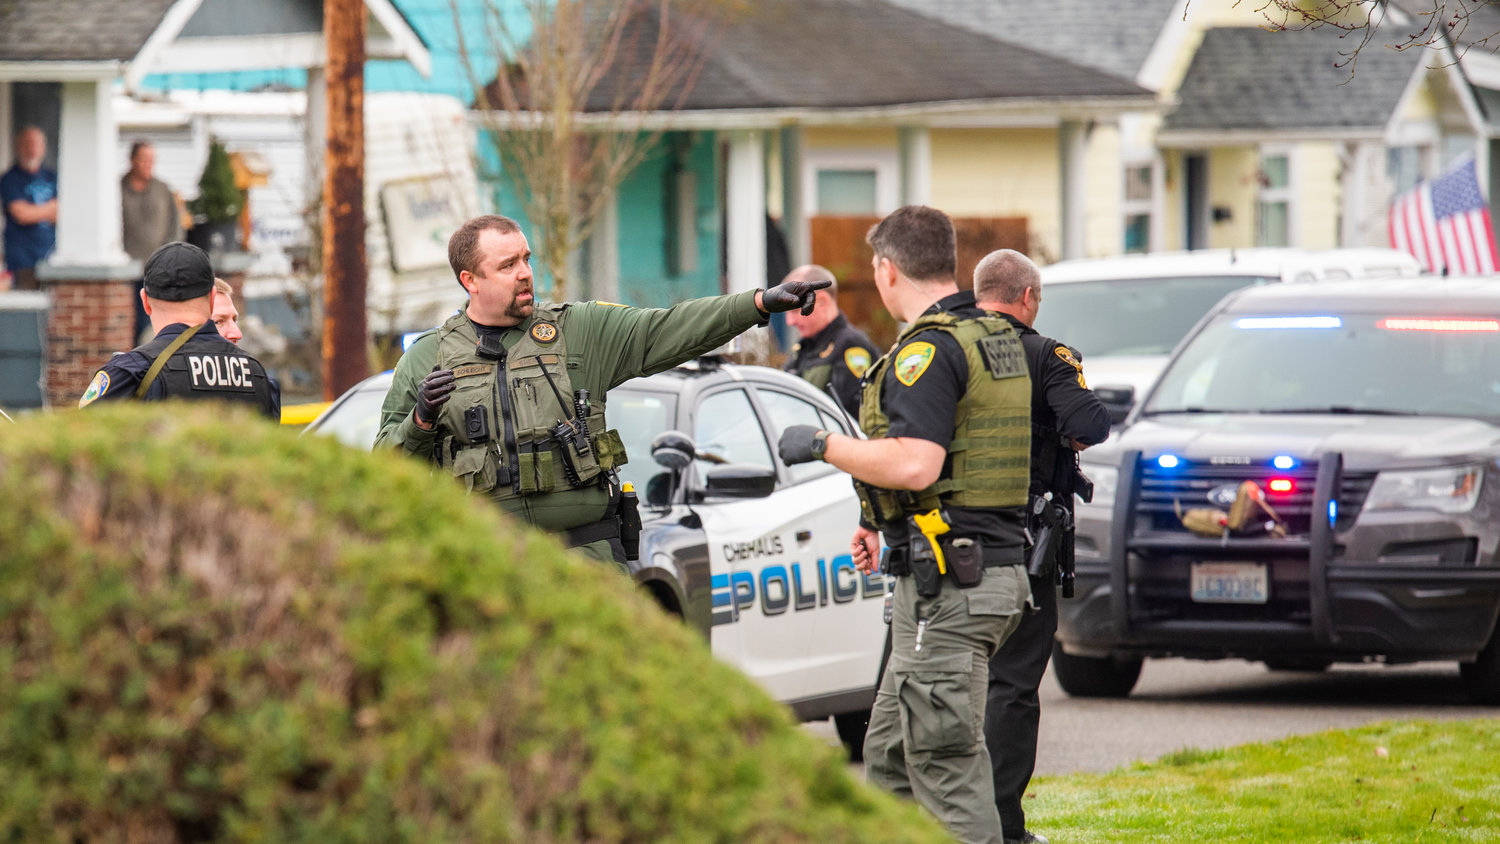 One person is dead and an officer with the Centralia Police Department suffered serious injuries in a shooting incident that occurred in the 100 block of Alfred Street at approximately noon on Friday, according to information obtained by The Chronicle. 